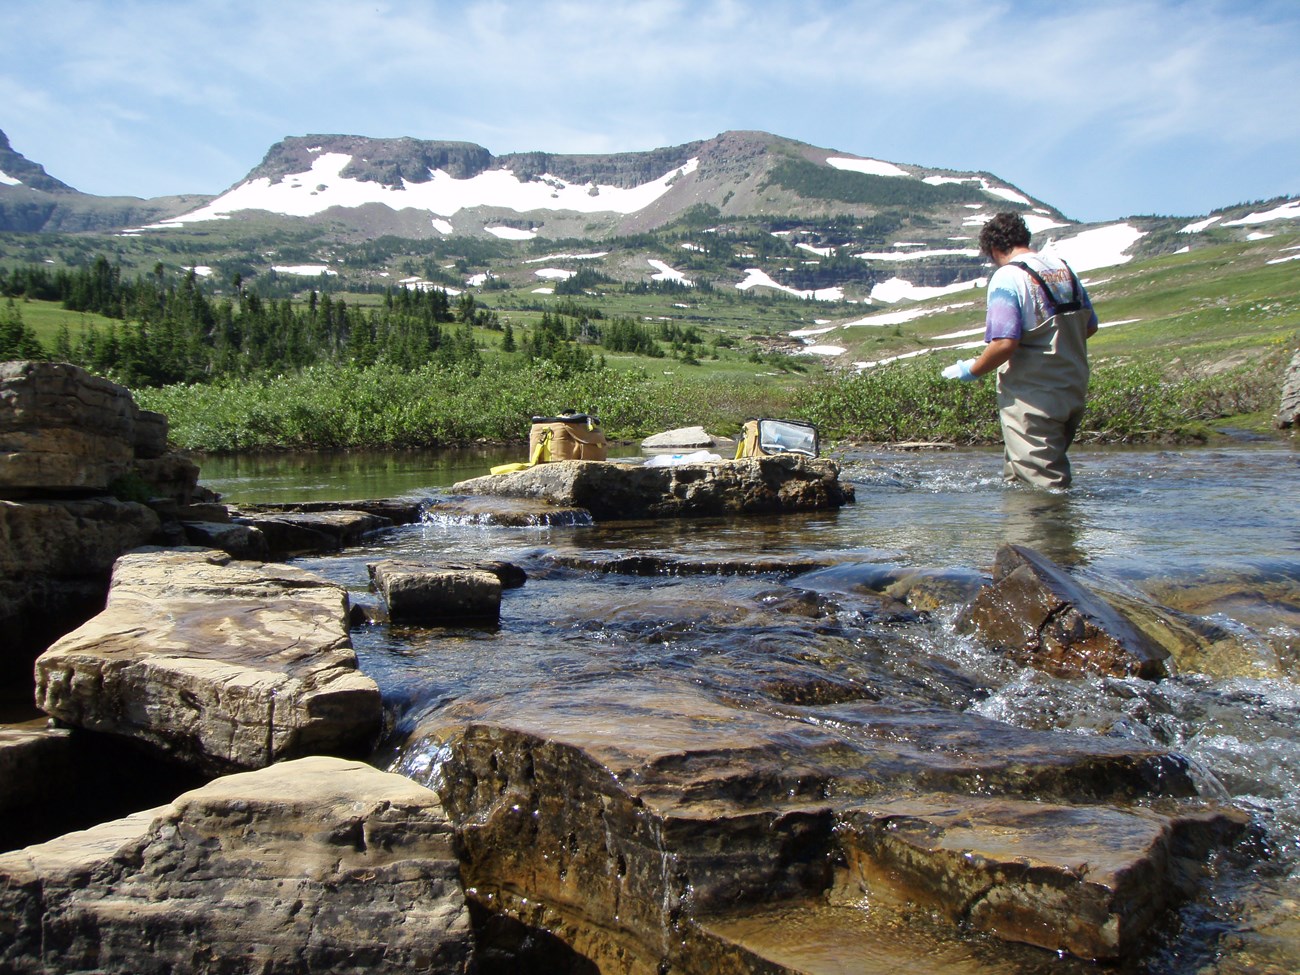 Technician collects water from an alpine stream with snowy mountains in background.